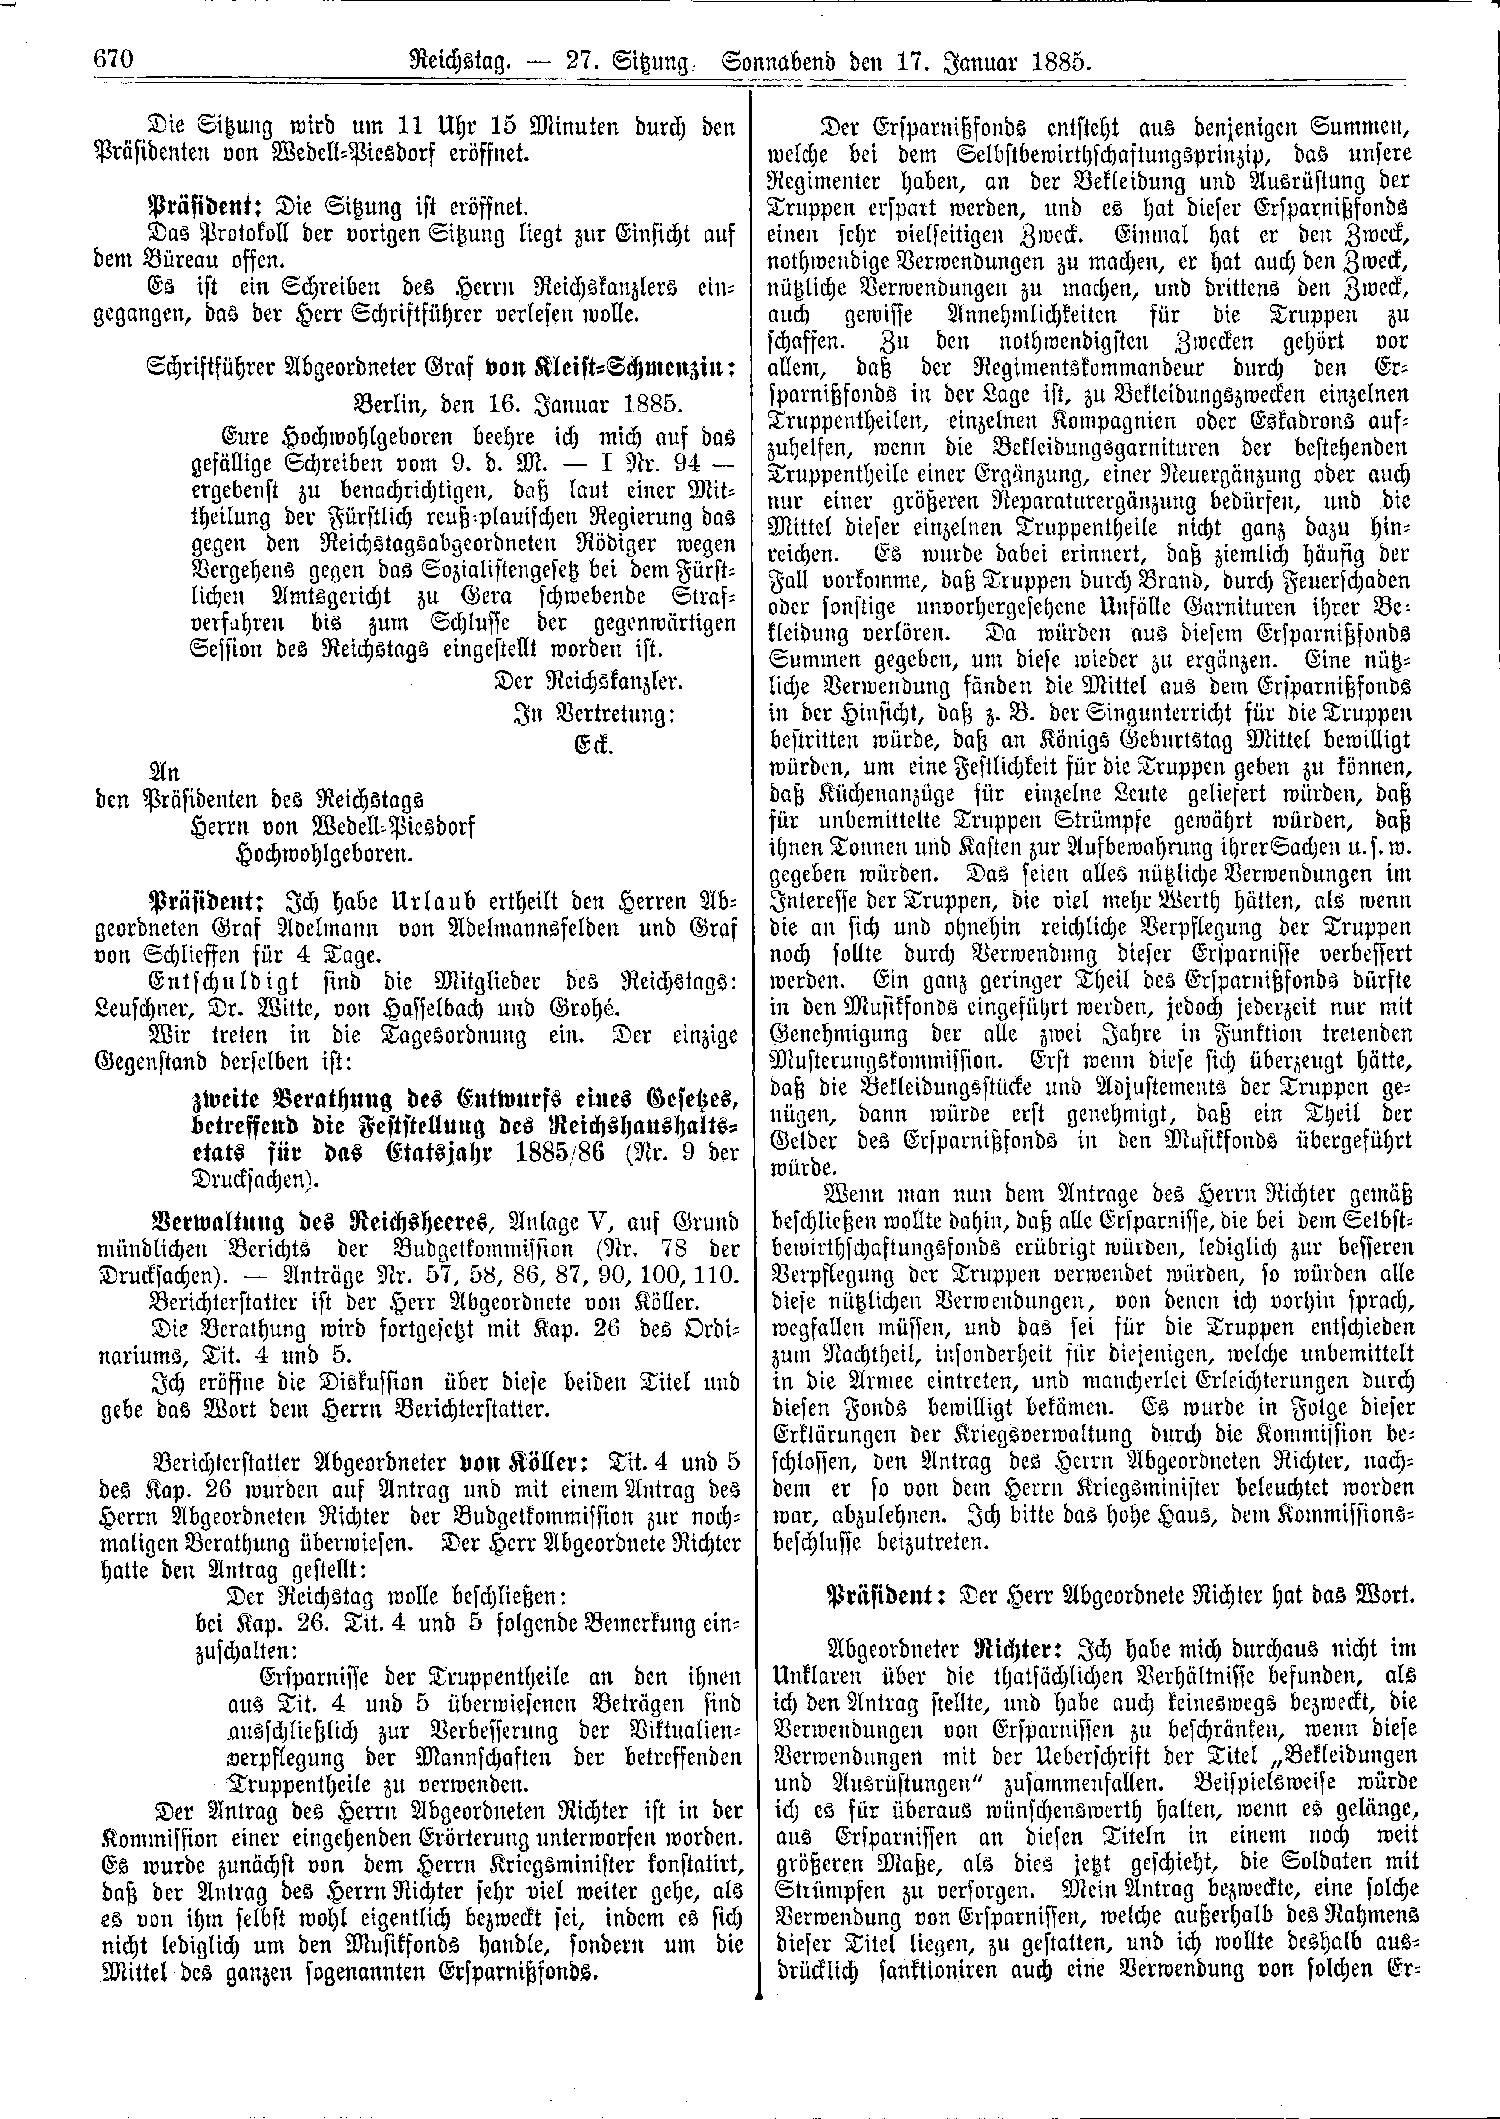 Scan of page 670